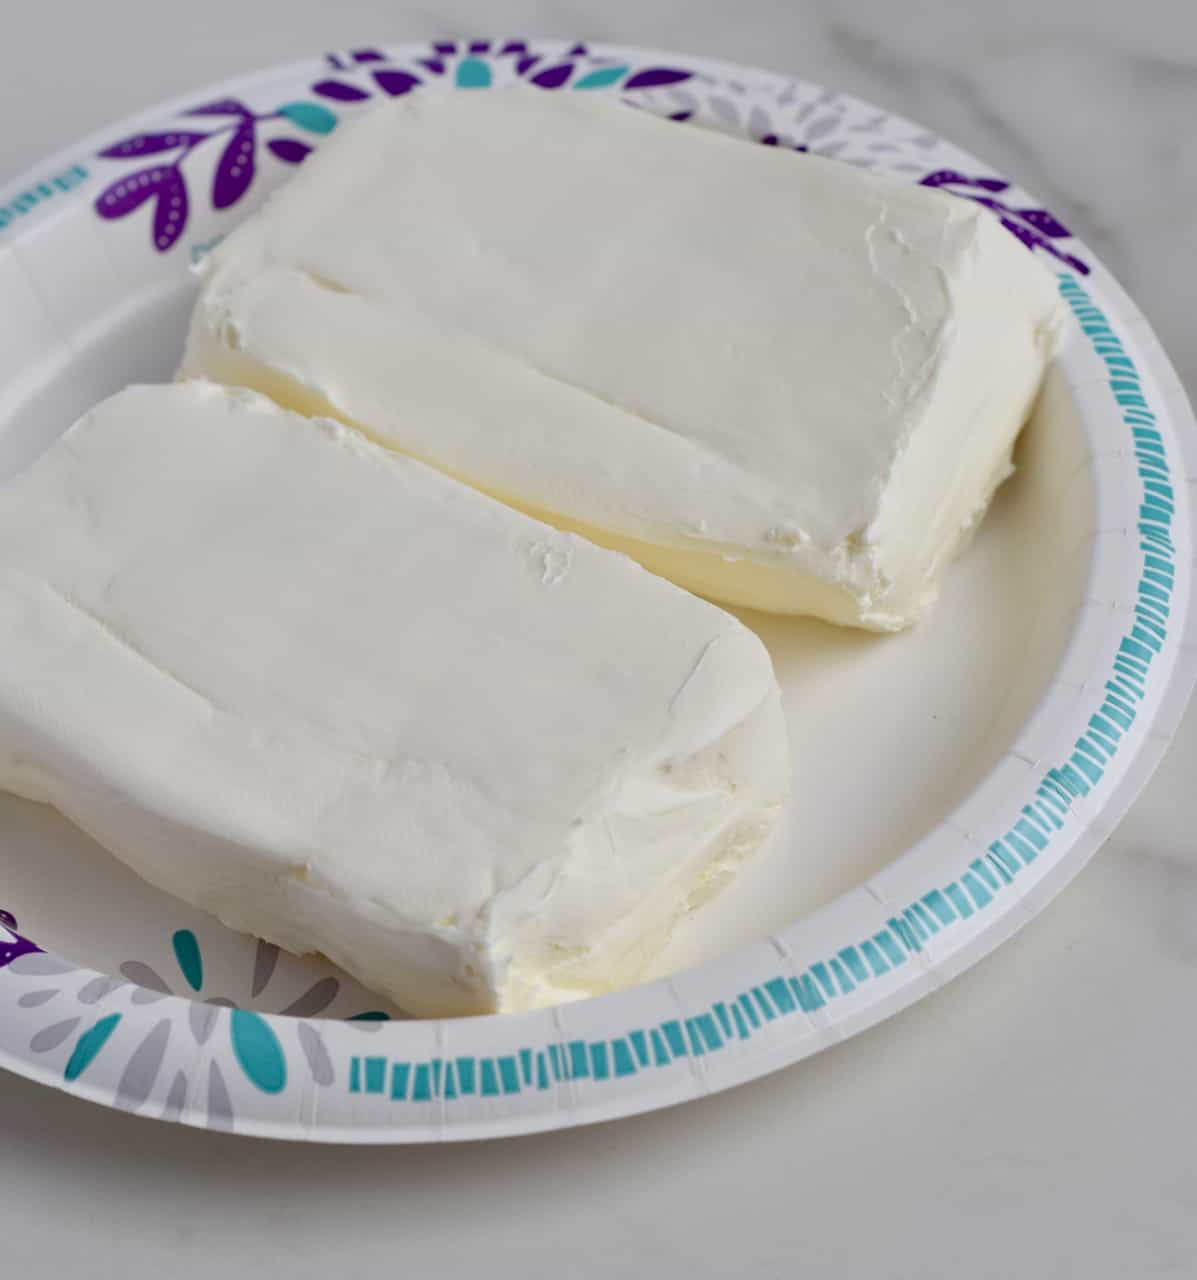  Cream cheese  blocks on a paper plate, unwrapped